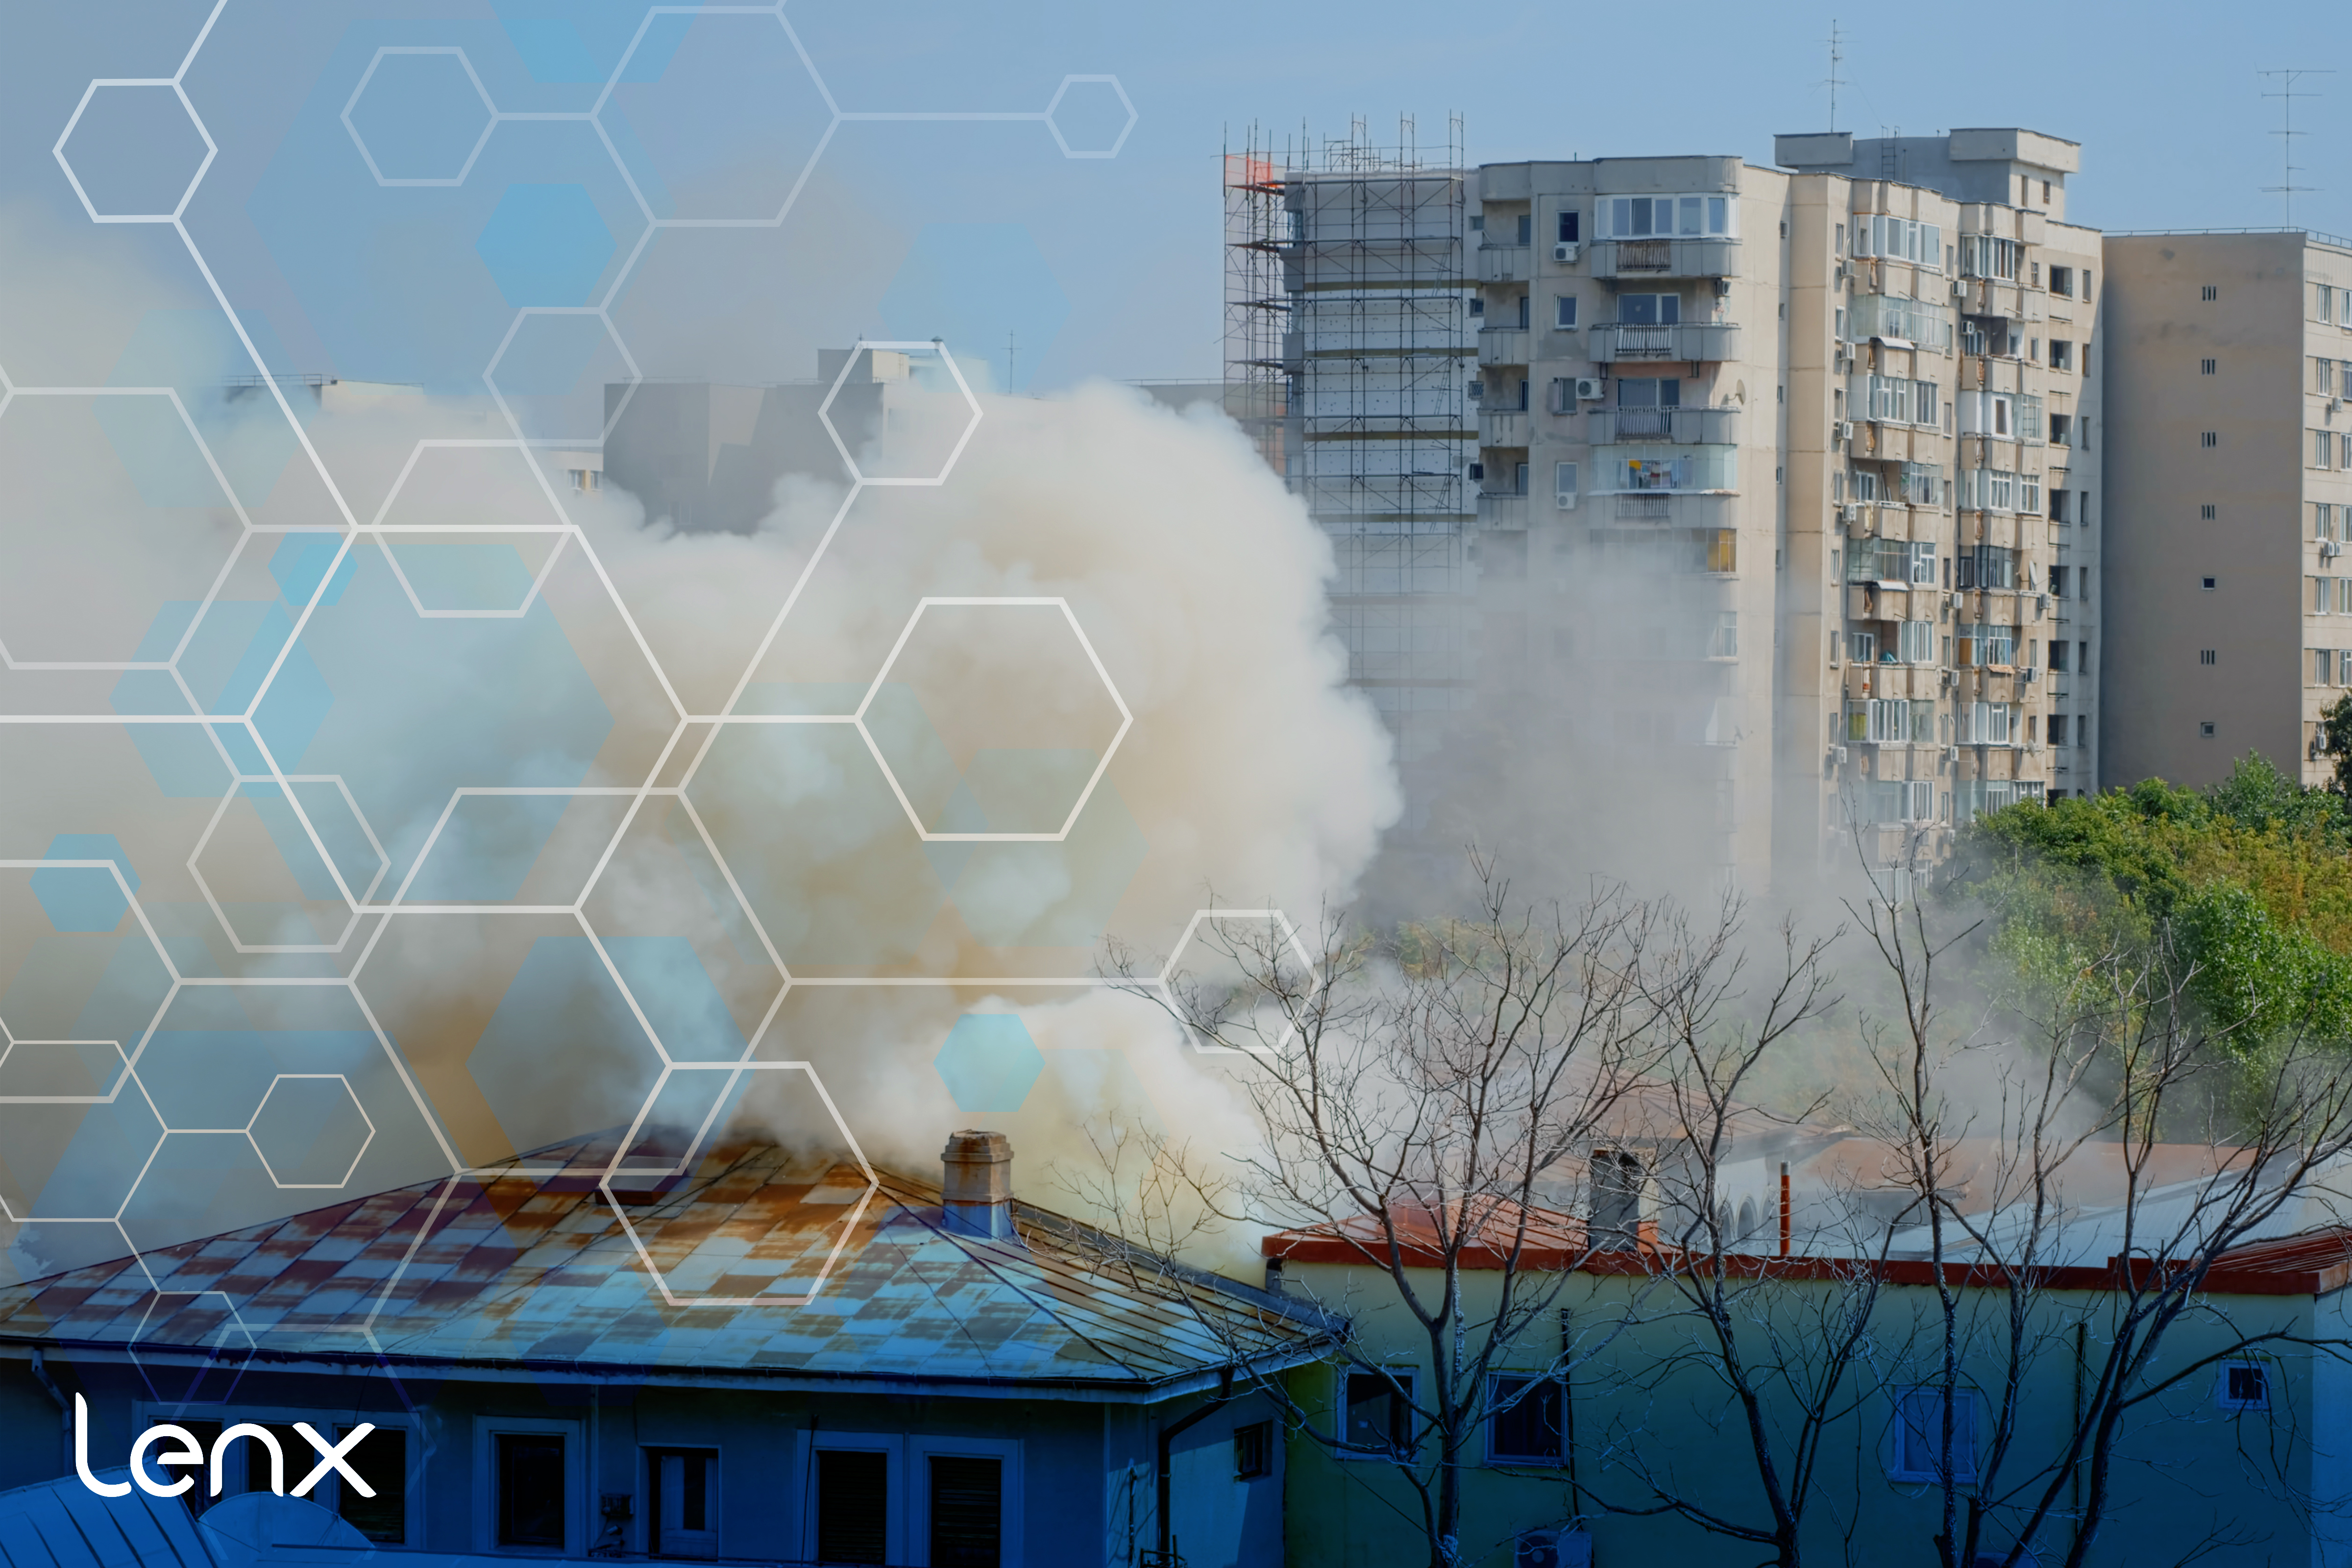 Keeping Property Safe With AI Security, Gun Detection Fire And Smoke Detection